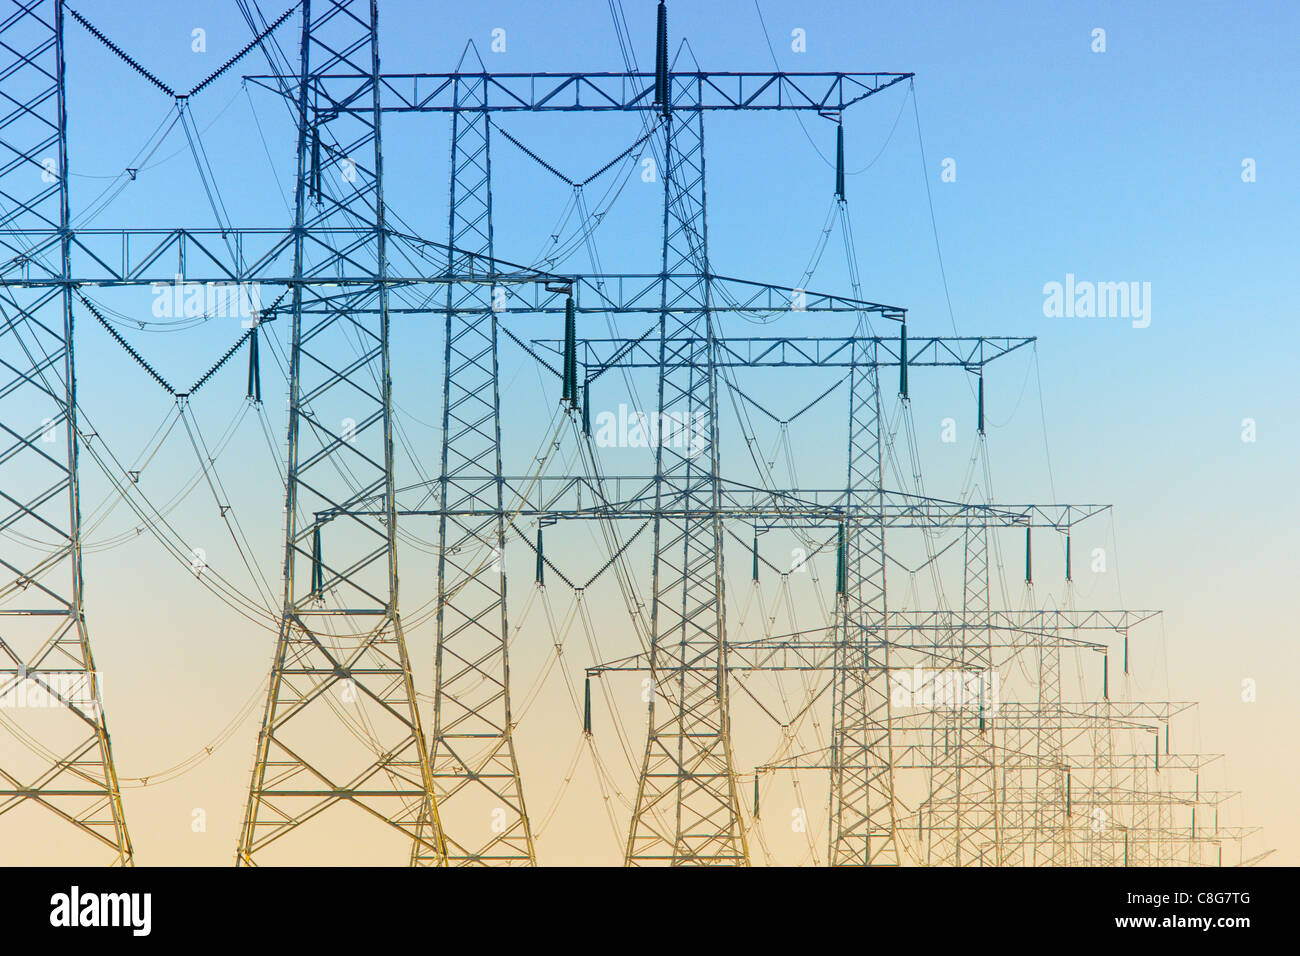 Electricity pylons standing in a row just before sunset Stock Photo